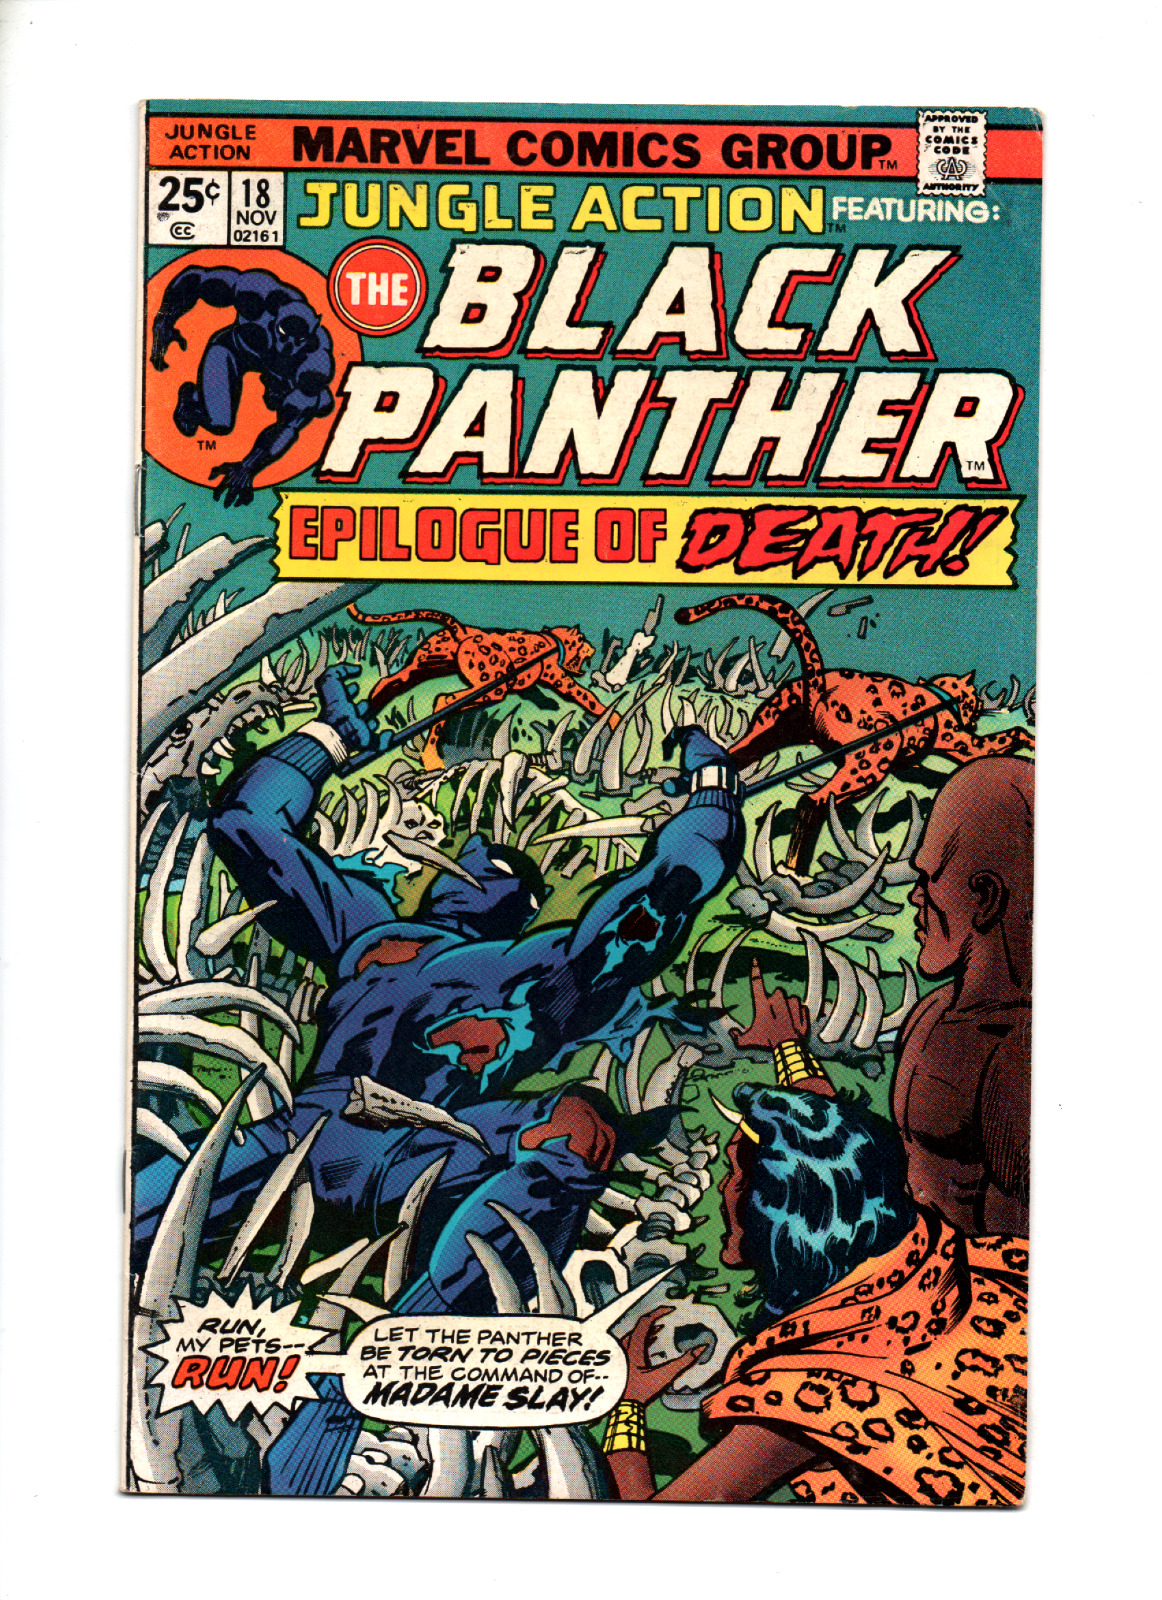 JUNGLE ACTION FEATURING: BLACK PANTHER #18 (11/75) FN+ 6.5 1ST MADAME SLAY, MUTE